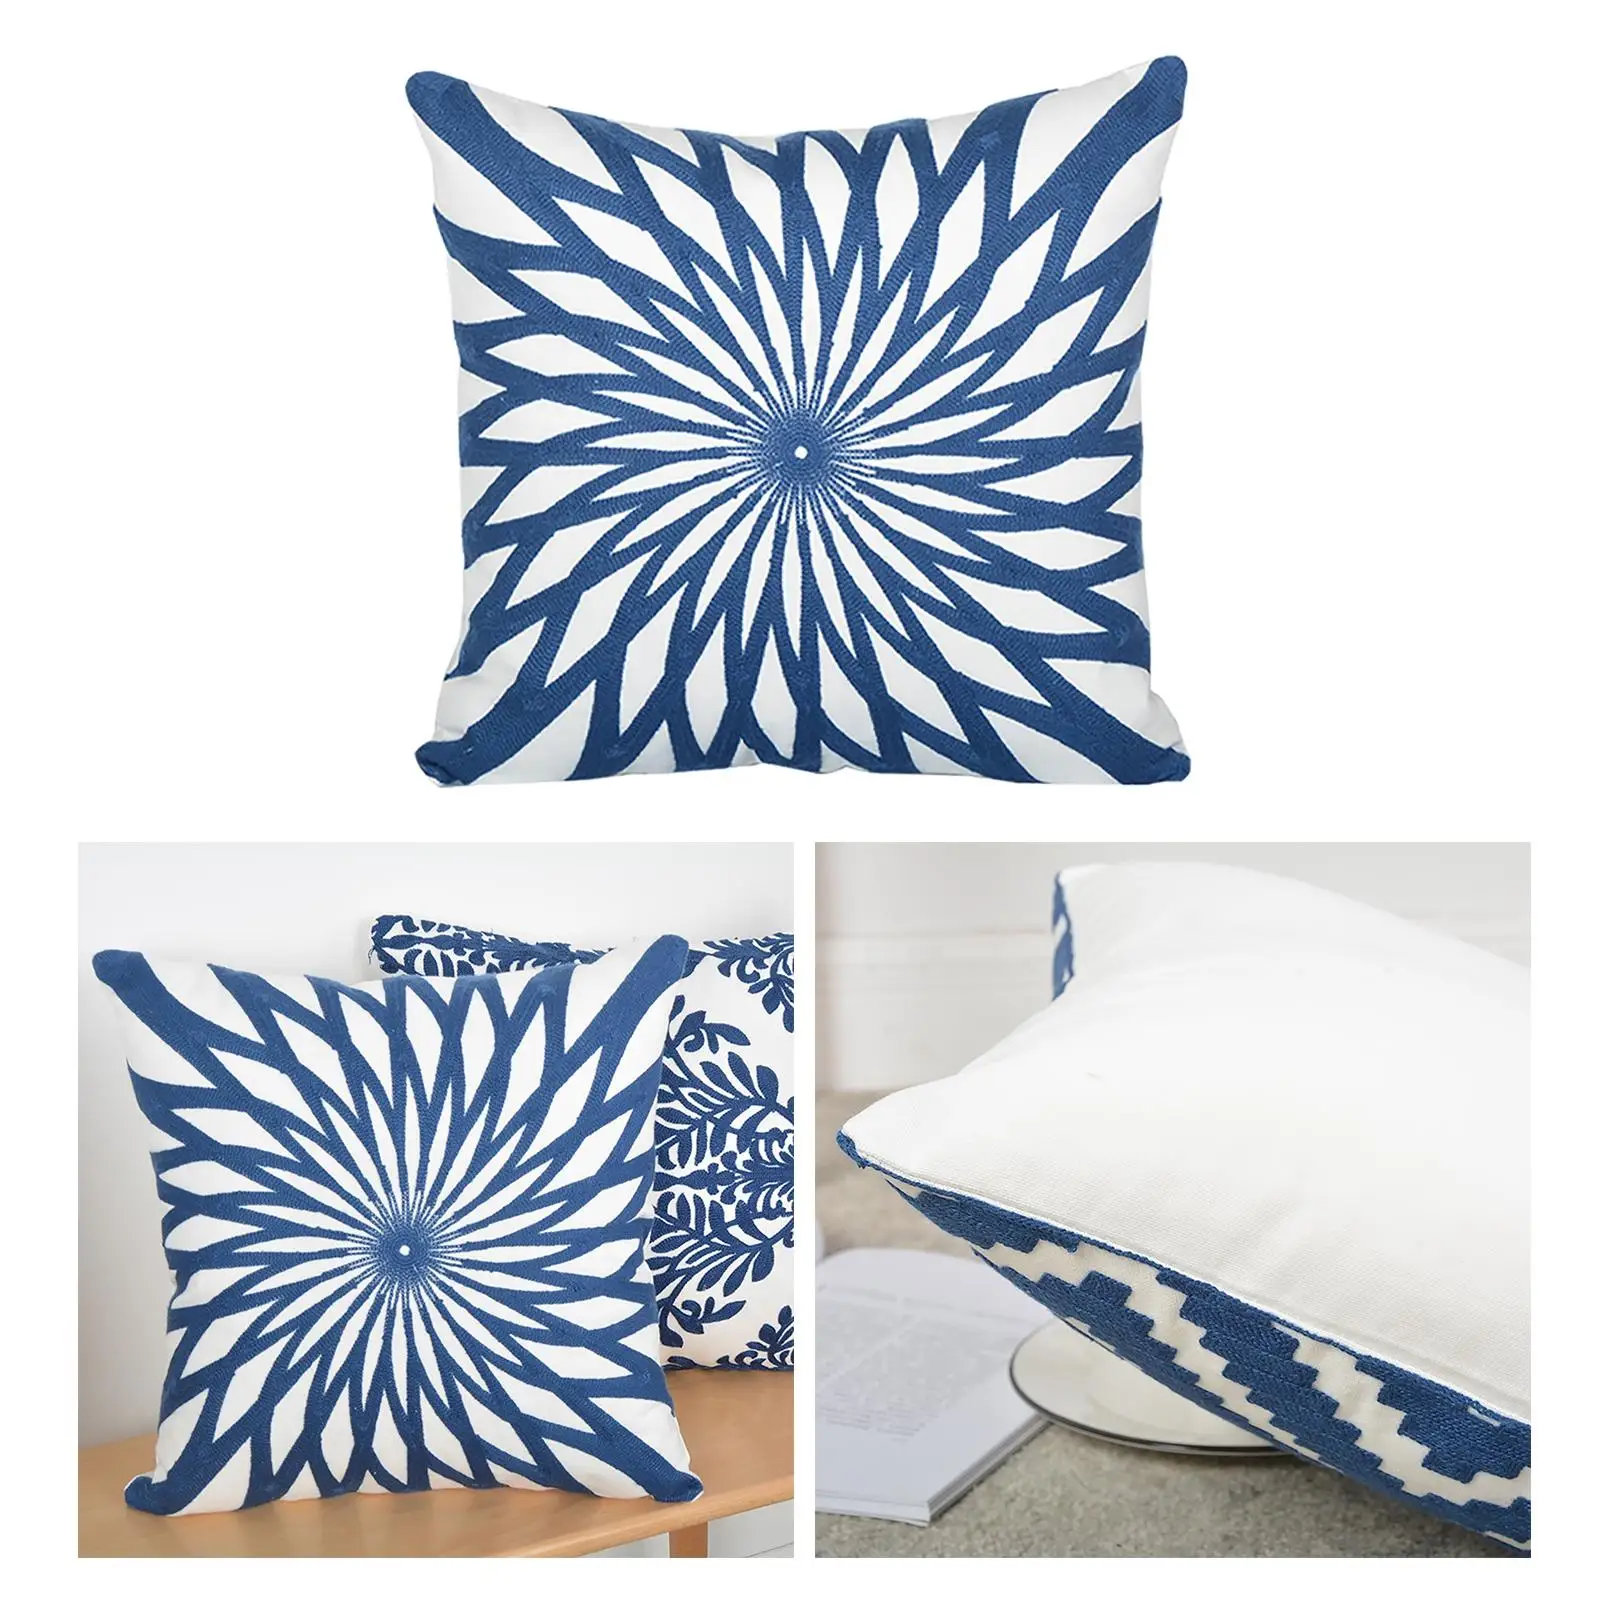 1 Piece Embroidered Pillowcase Cozy Modern Cushion Throw Cushion Cover for Bedroom